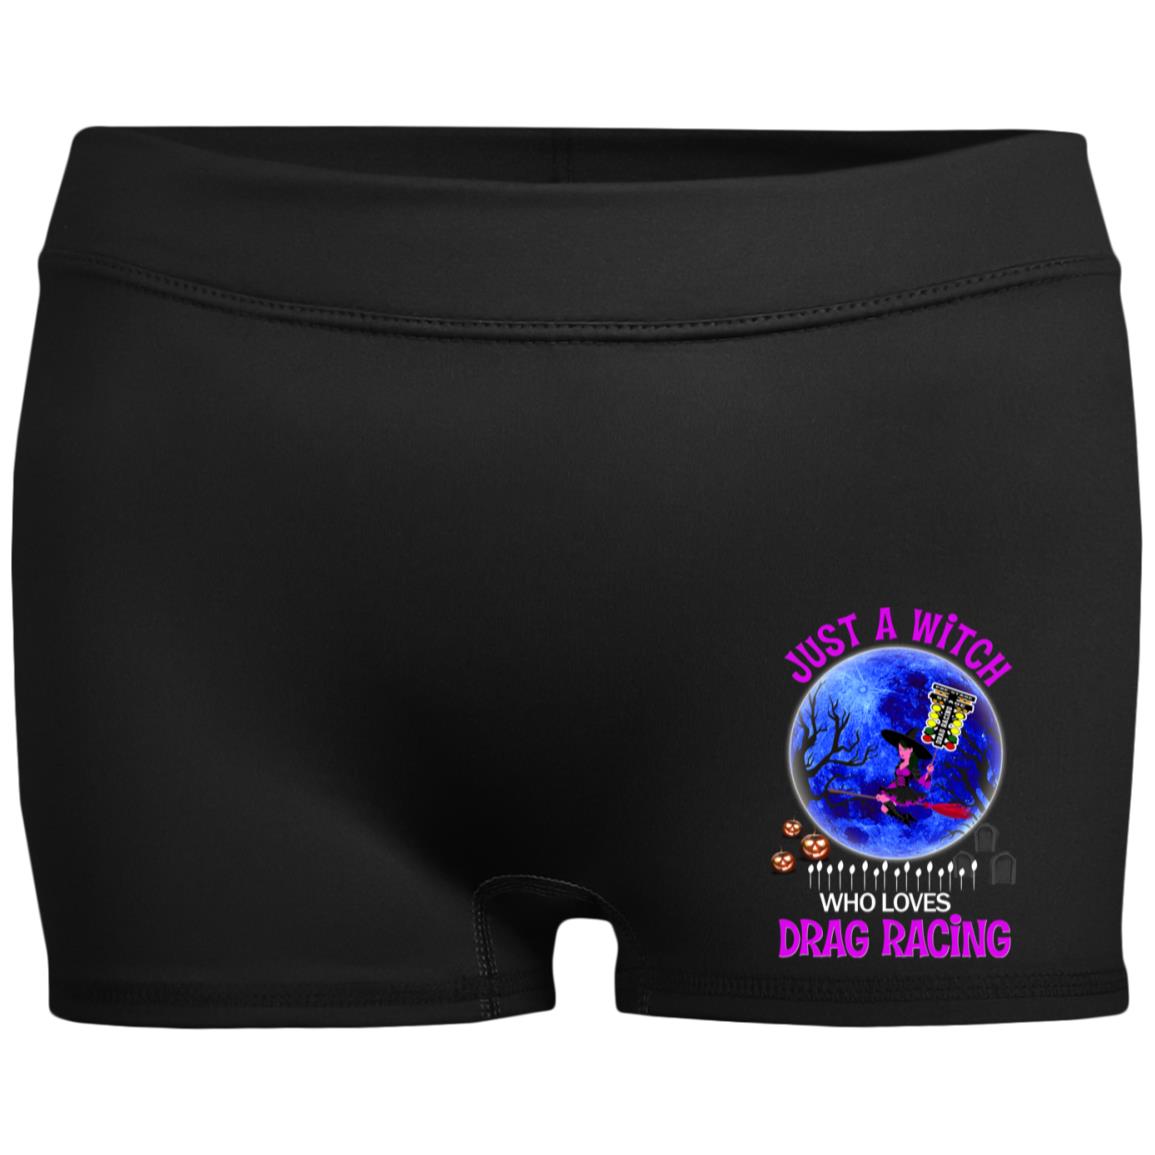 Just A Witch Who Loves Drag Racing Ladies' Fitted Moisture-Wicking 2.5 inch Inseam Shorts